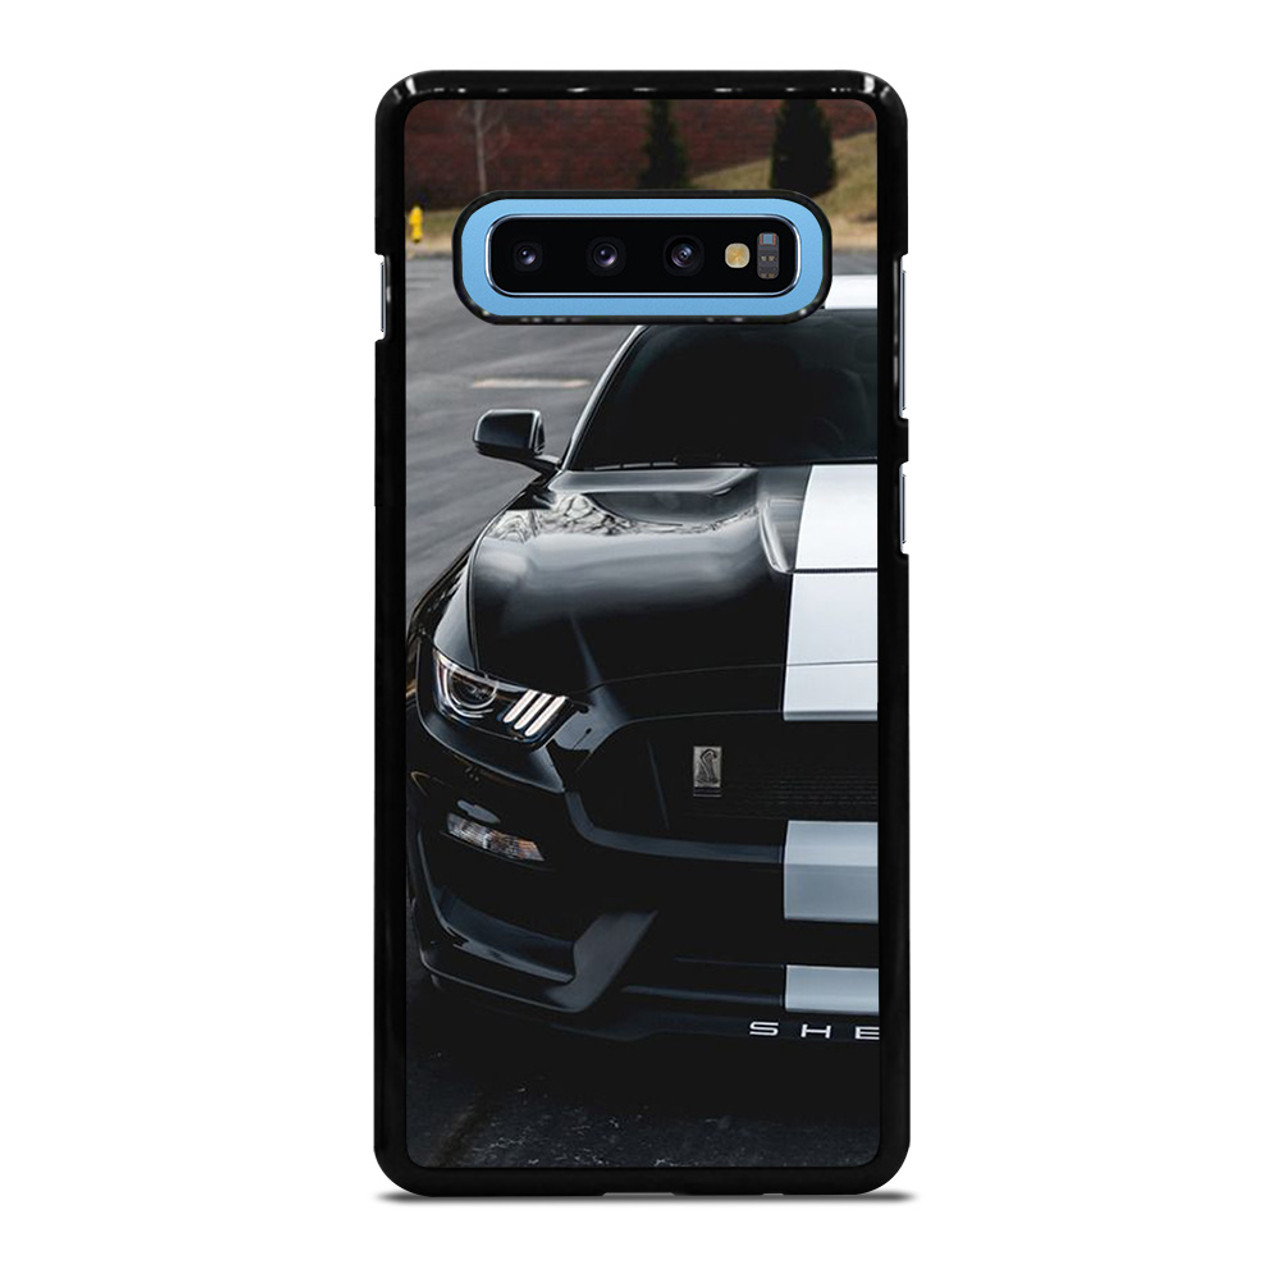 Huisje Franje Schat FORD MUSTANG SHELBY BLACK Samsung Galaxy S10 Plus Case Cover